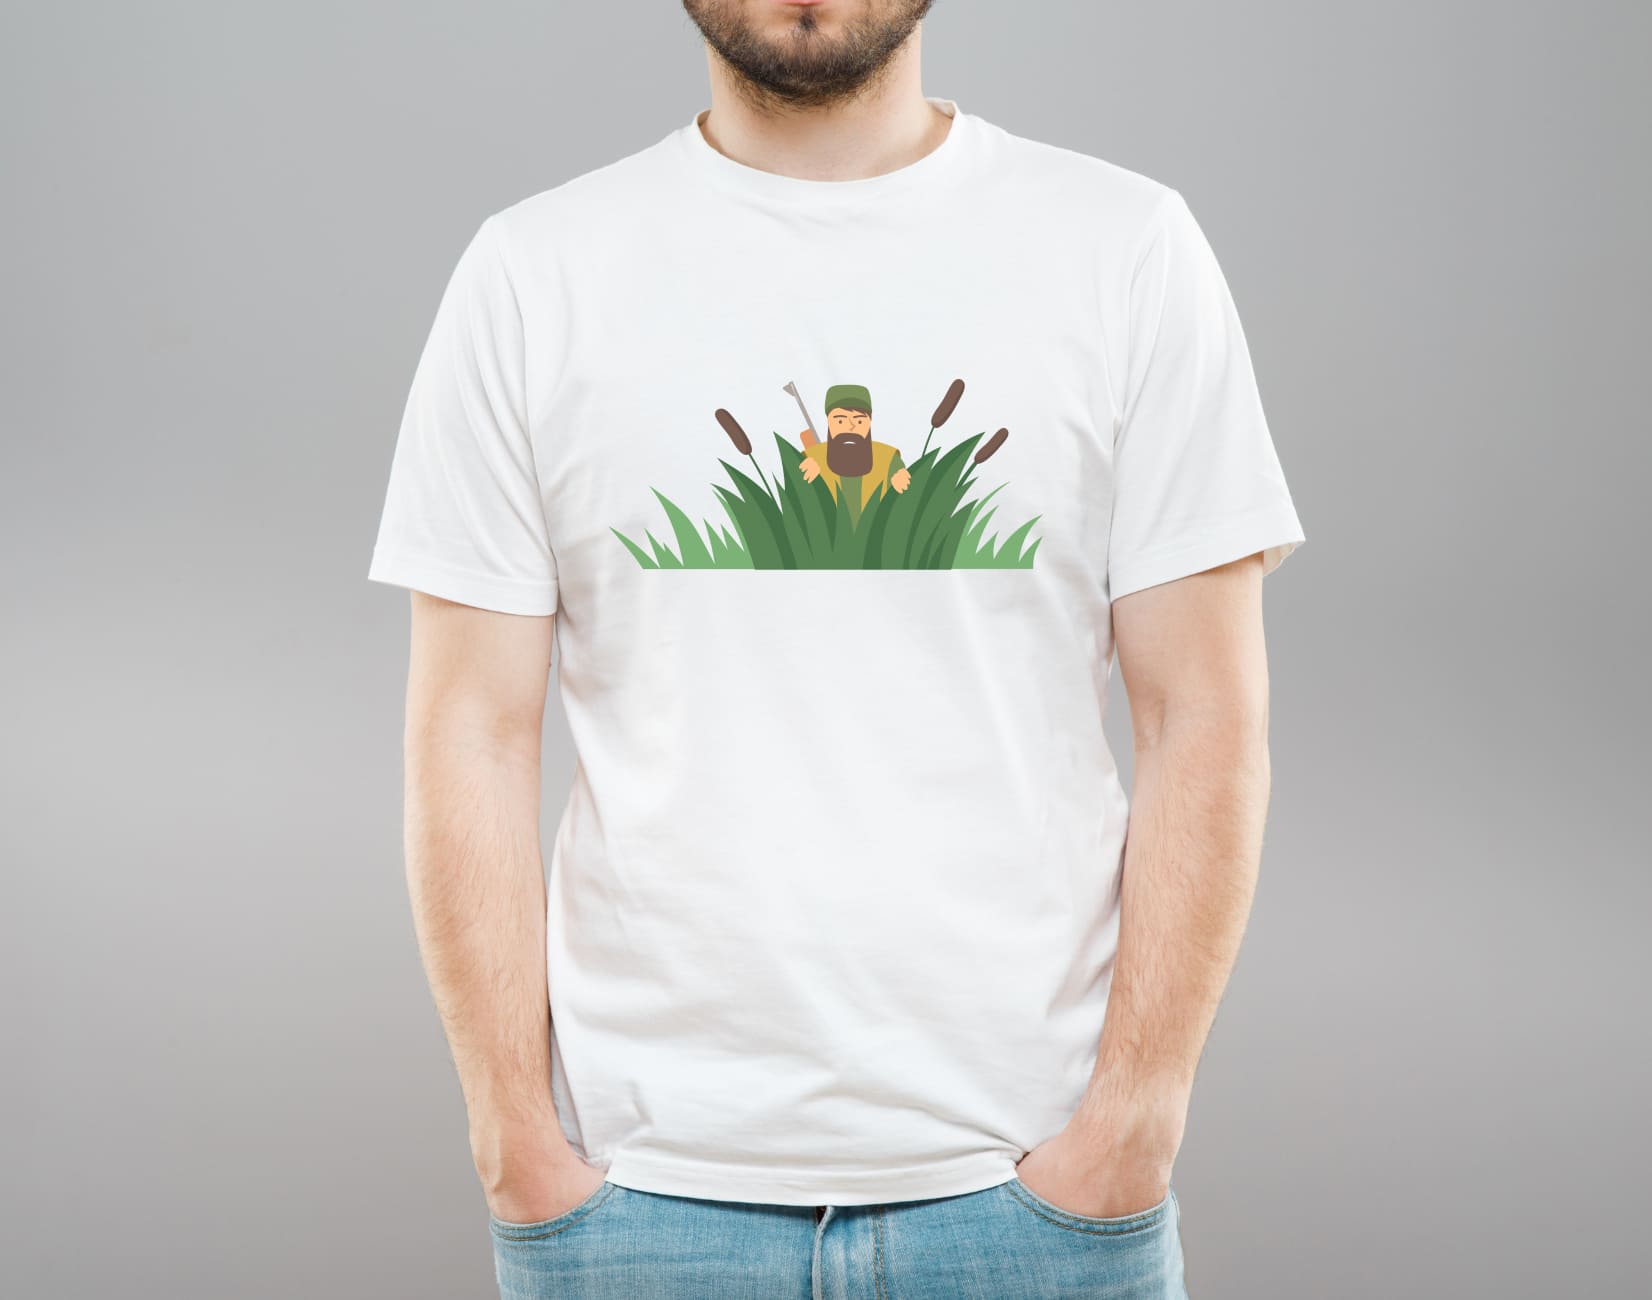 Hunting T Shirts Funny designs, themes, templates and downloadable